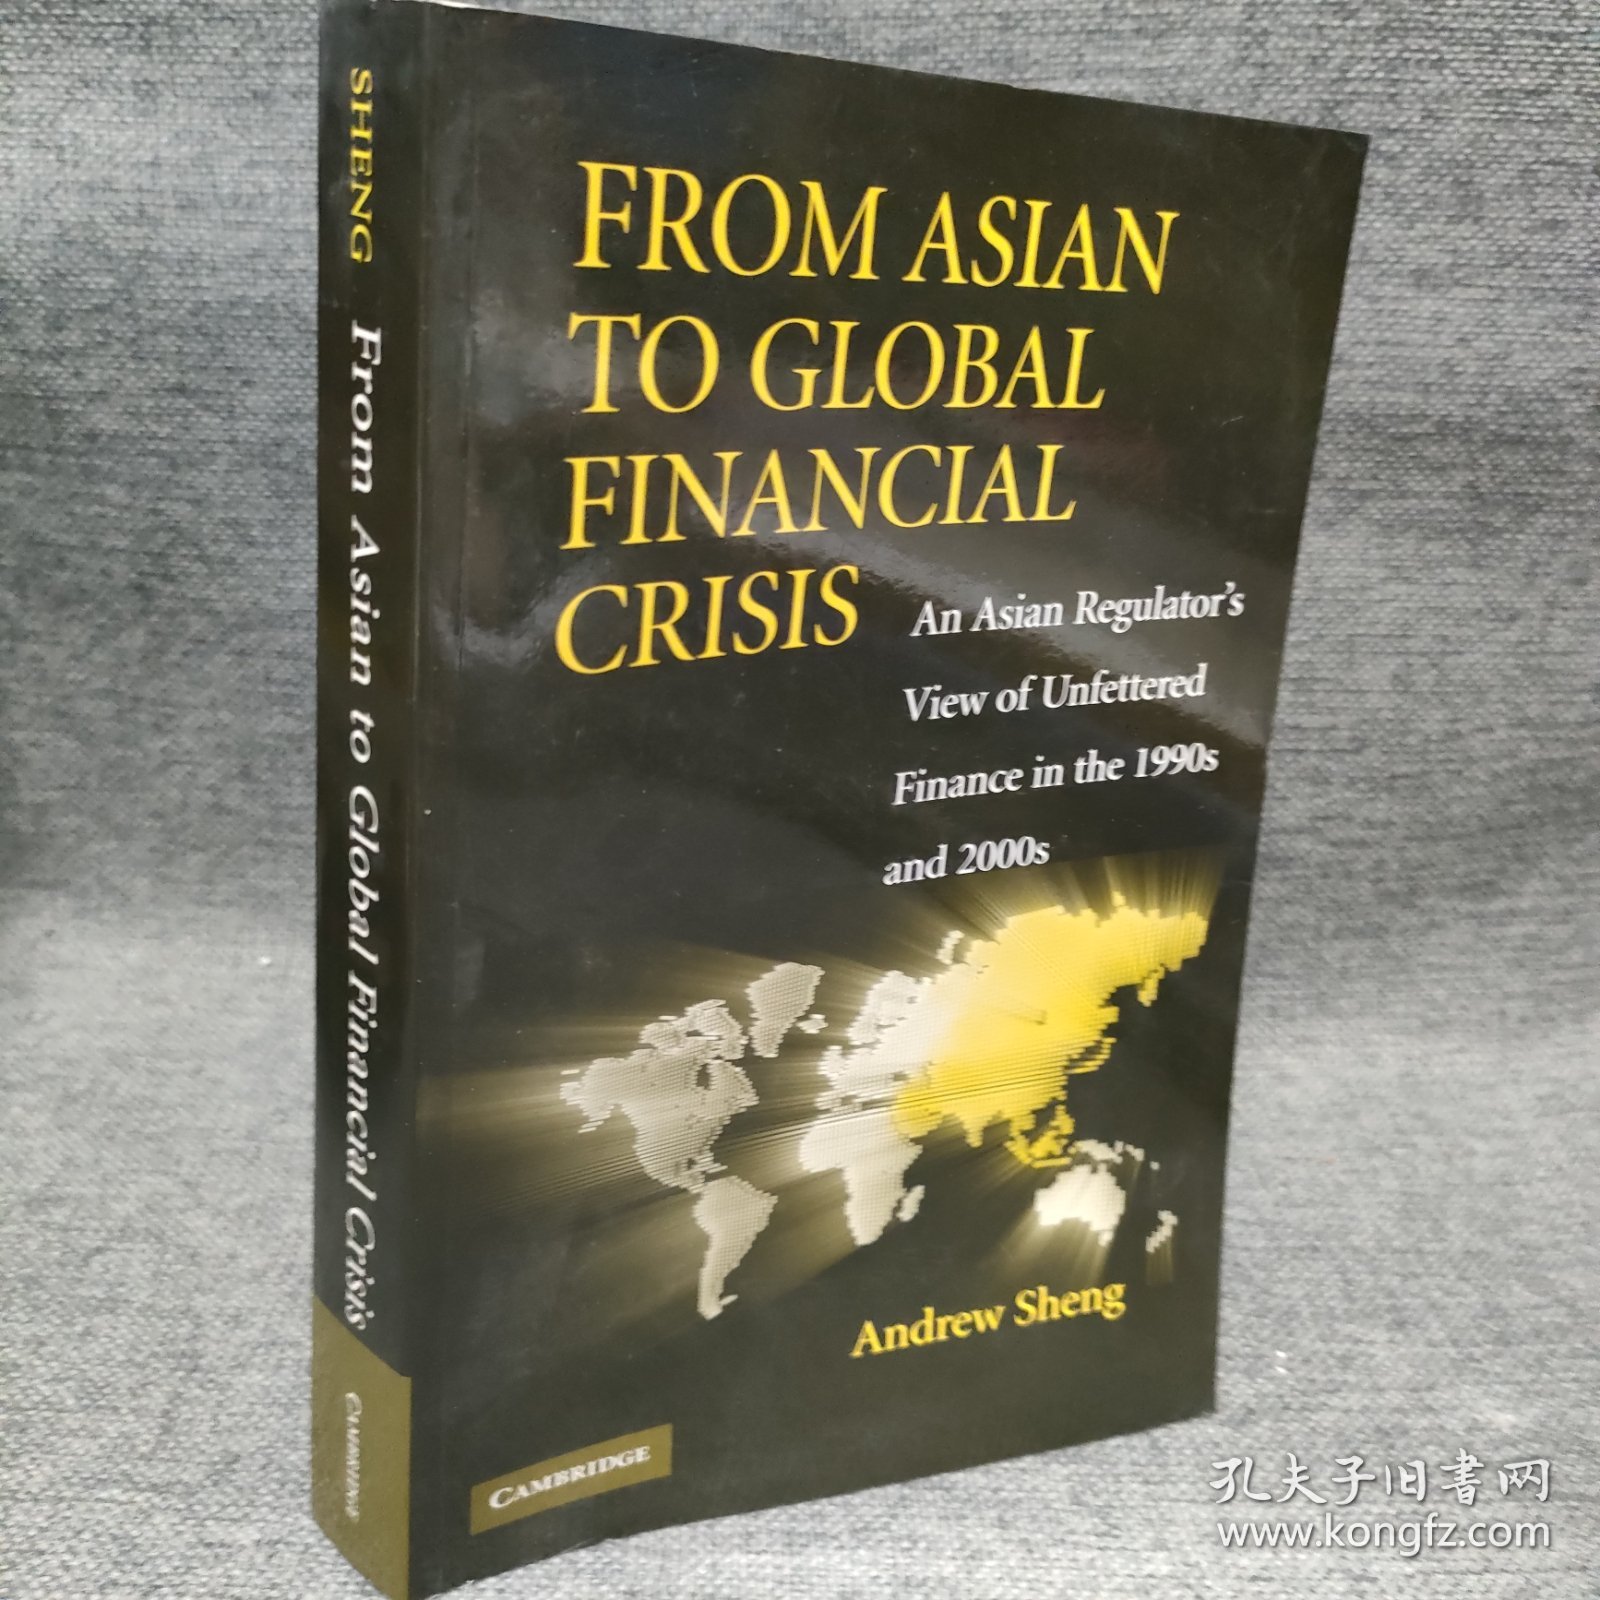 FROM ASIAN TO GLOBAL FINANCIAL CRISIS作者签赠？